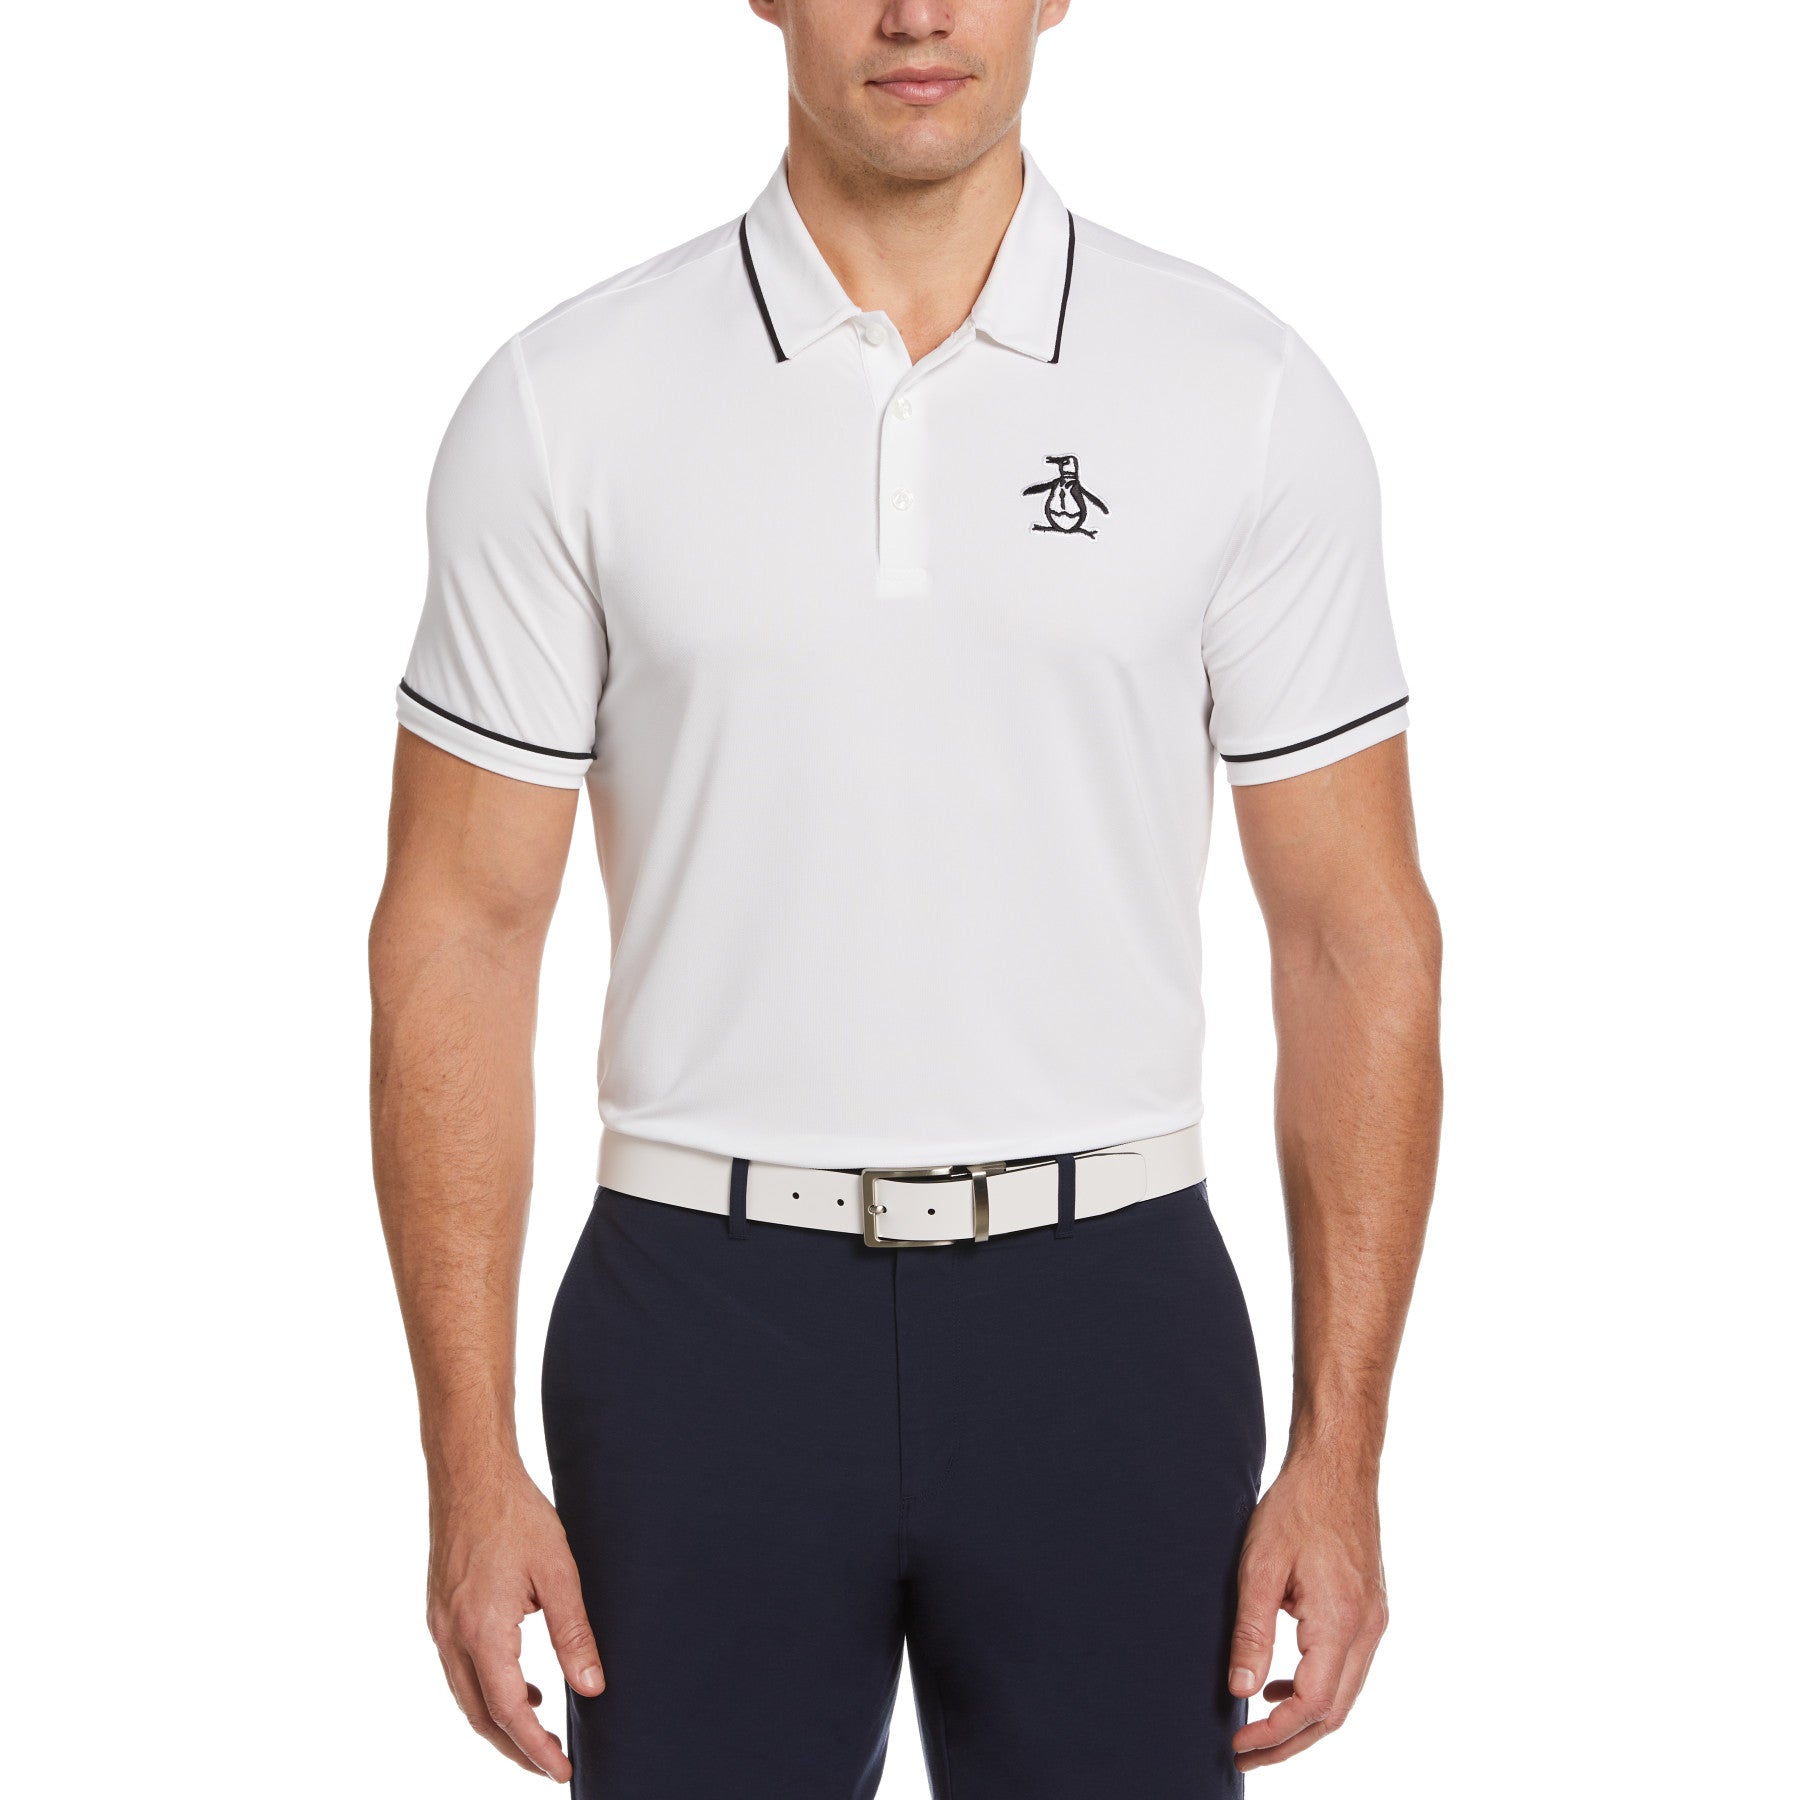 View Pete Tipped Golf Polo Shirt In Bright White information